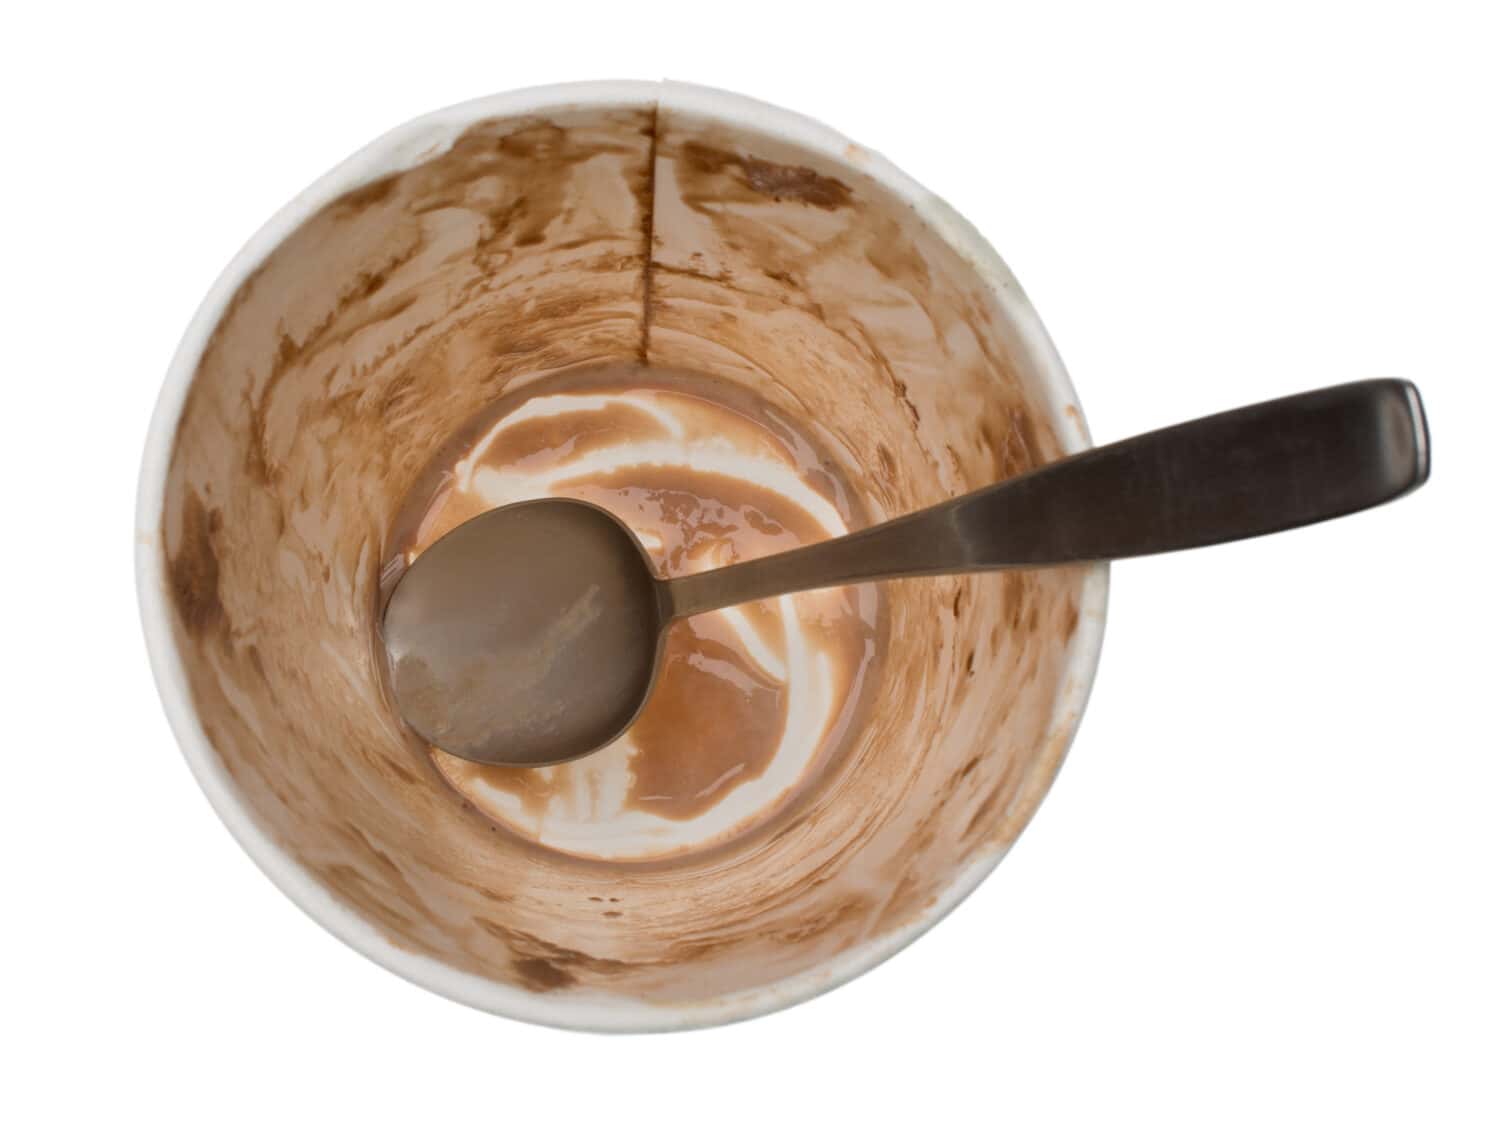 Empty ice cream container. The dirty spoon and the paper tub smeared with chocolate are all that's left of this pint of ice cream. Isolated on a white background